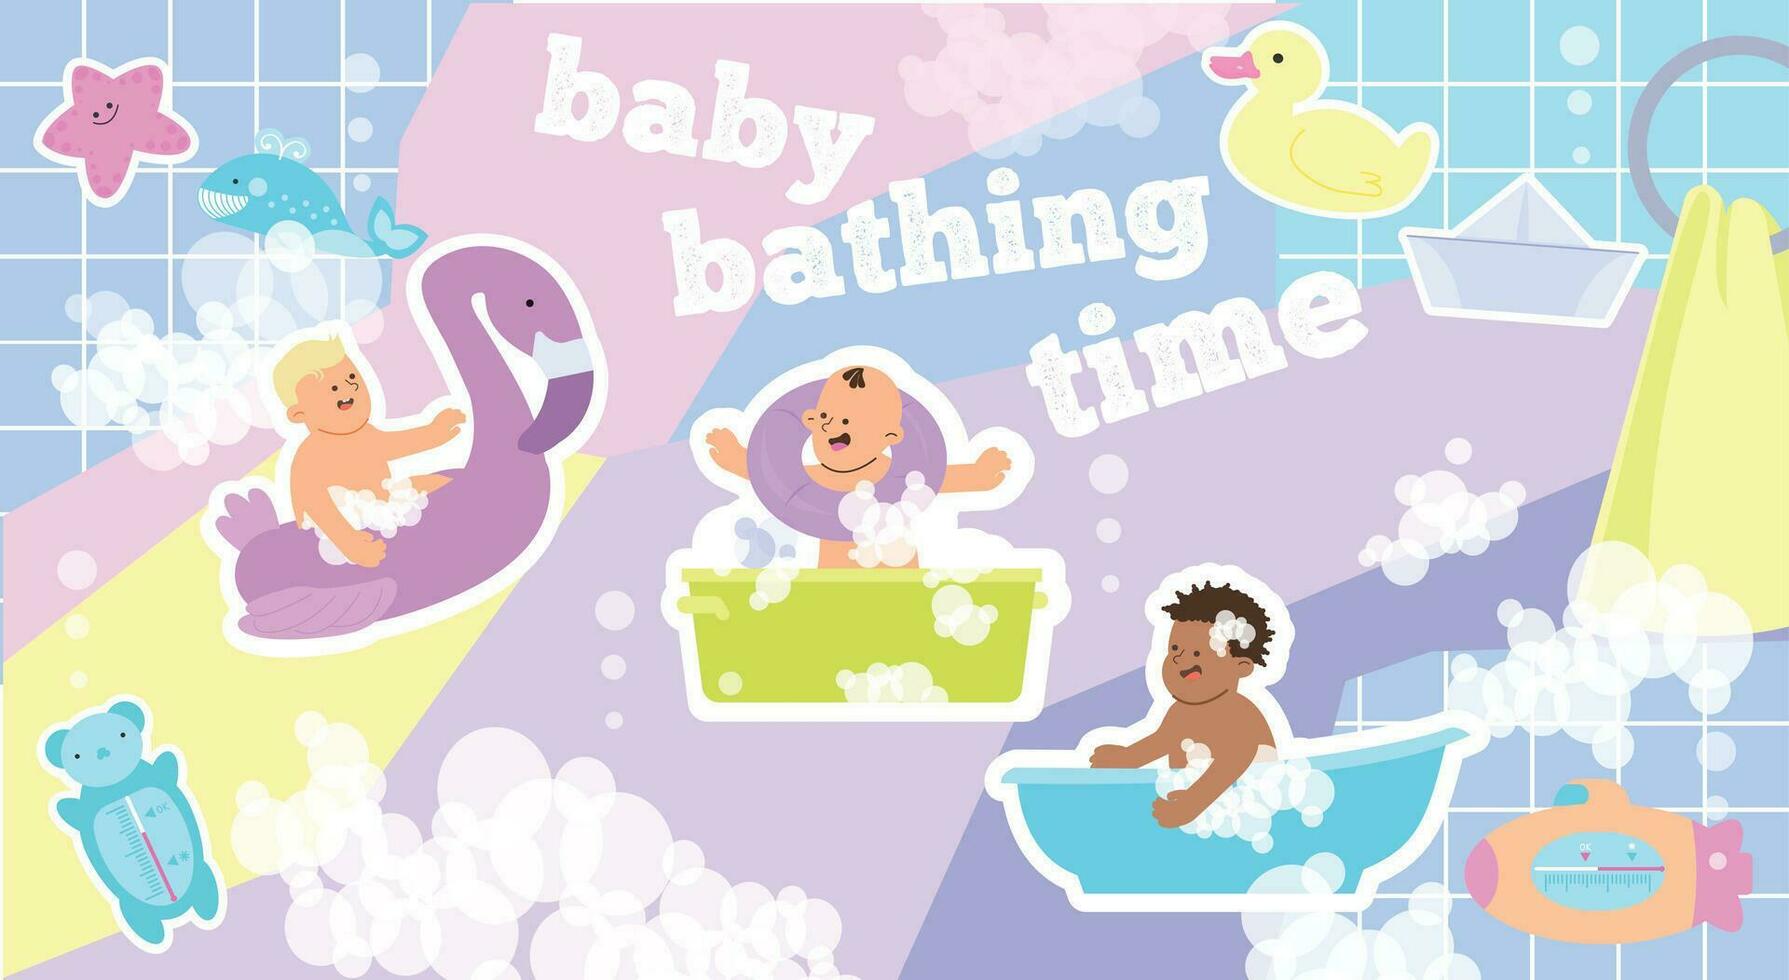 Baby Bathing Time Collage vector